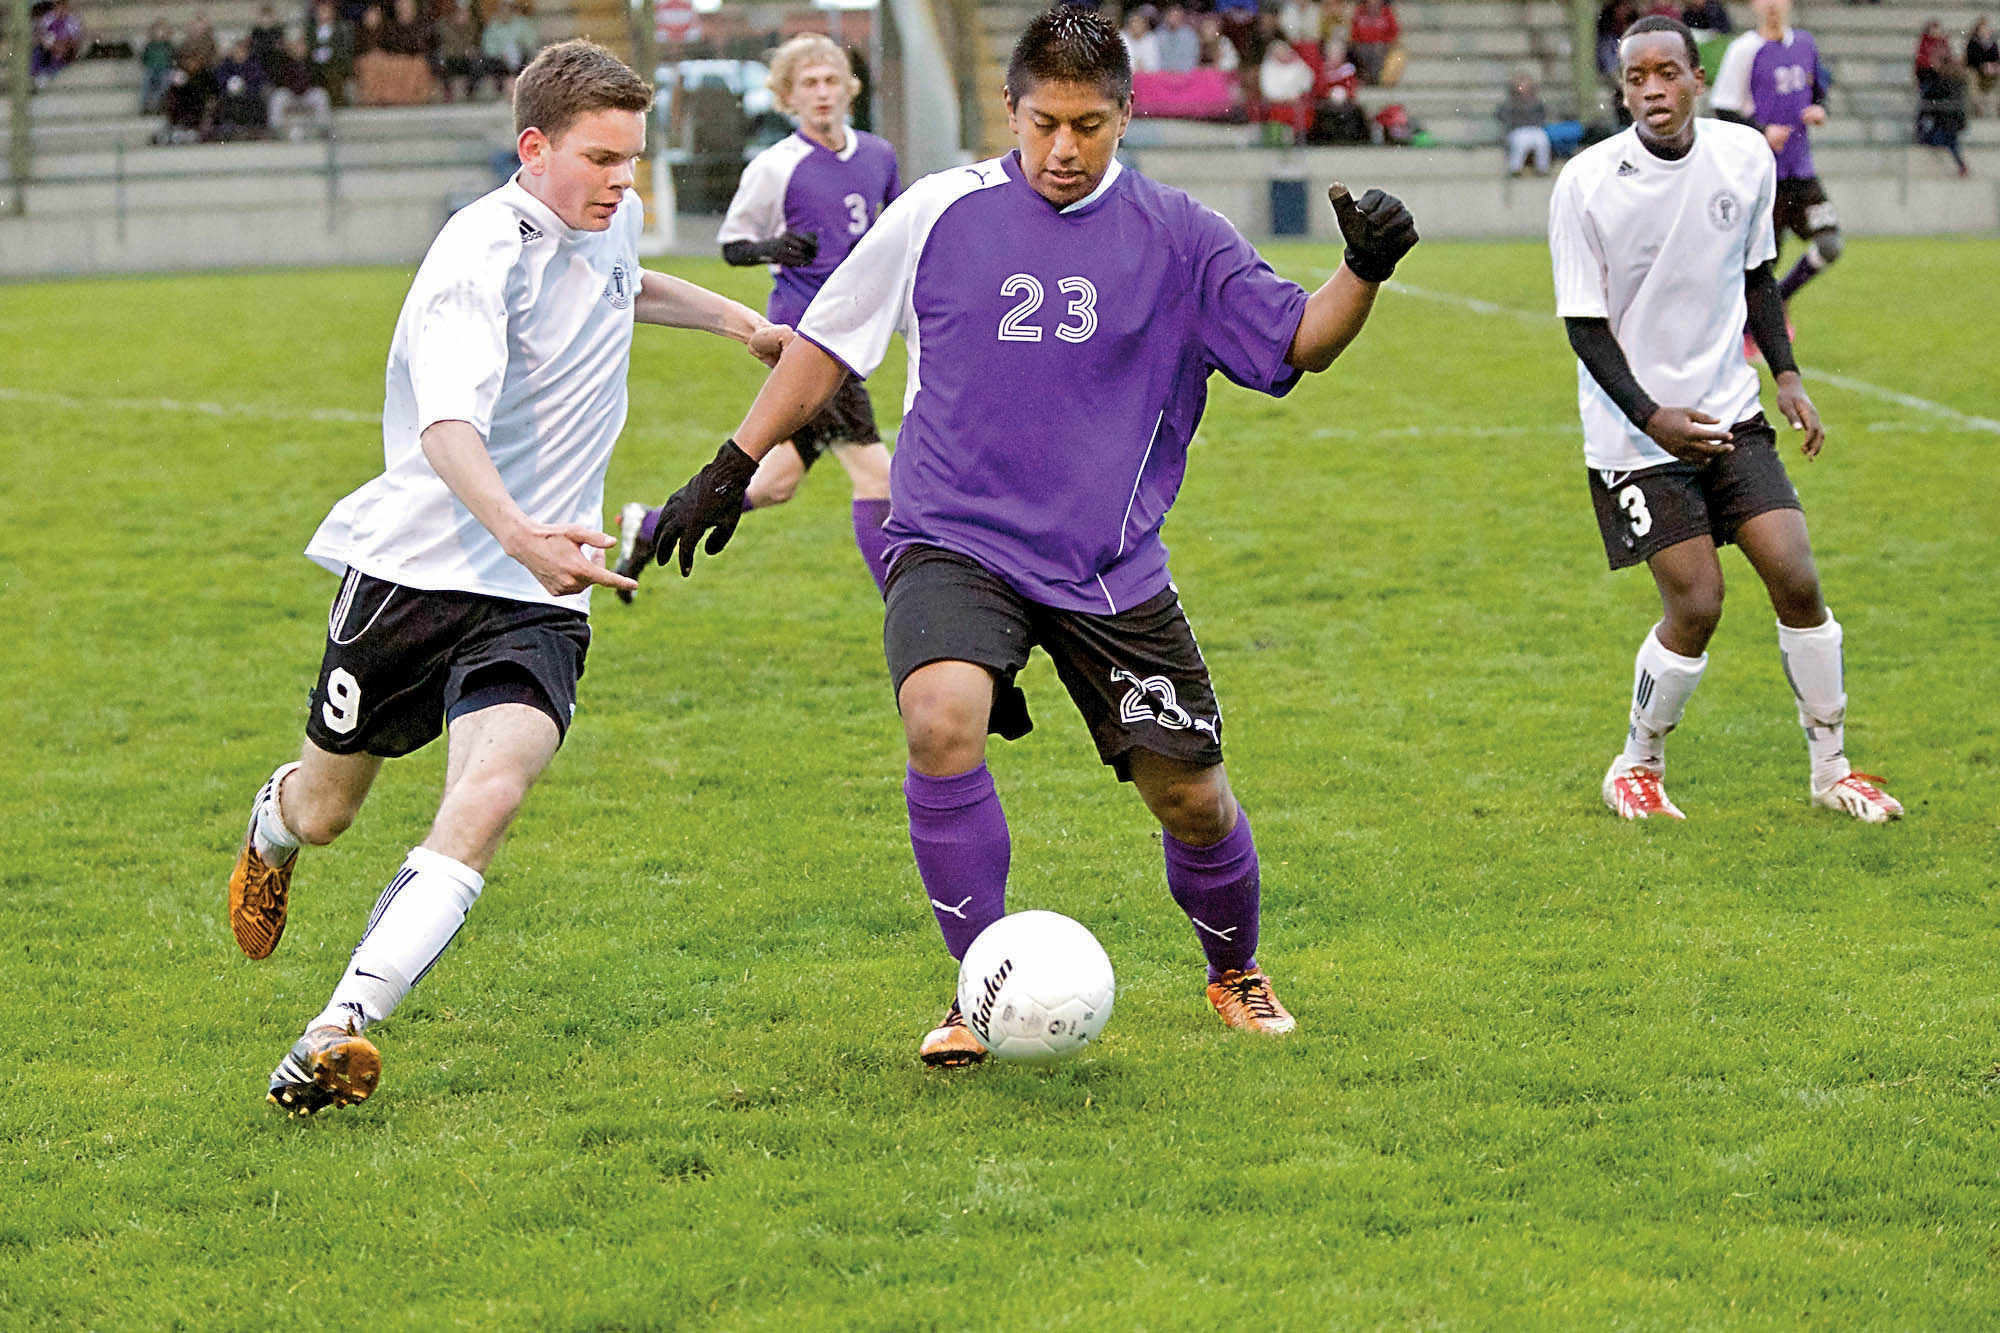 Port Townsend's Carl Delaire (9) and Sequim's Hector Baylon (23) vie for control of the ball. Steve Mullensky/for Peninsula Daily News